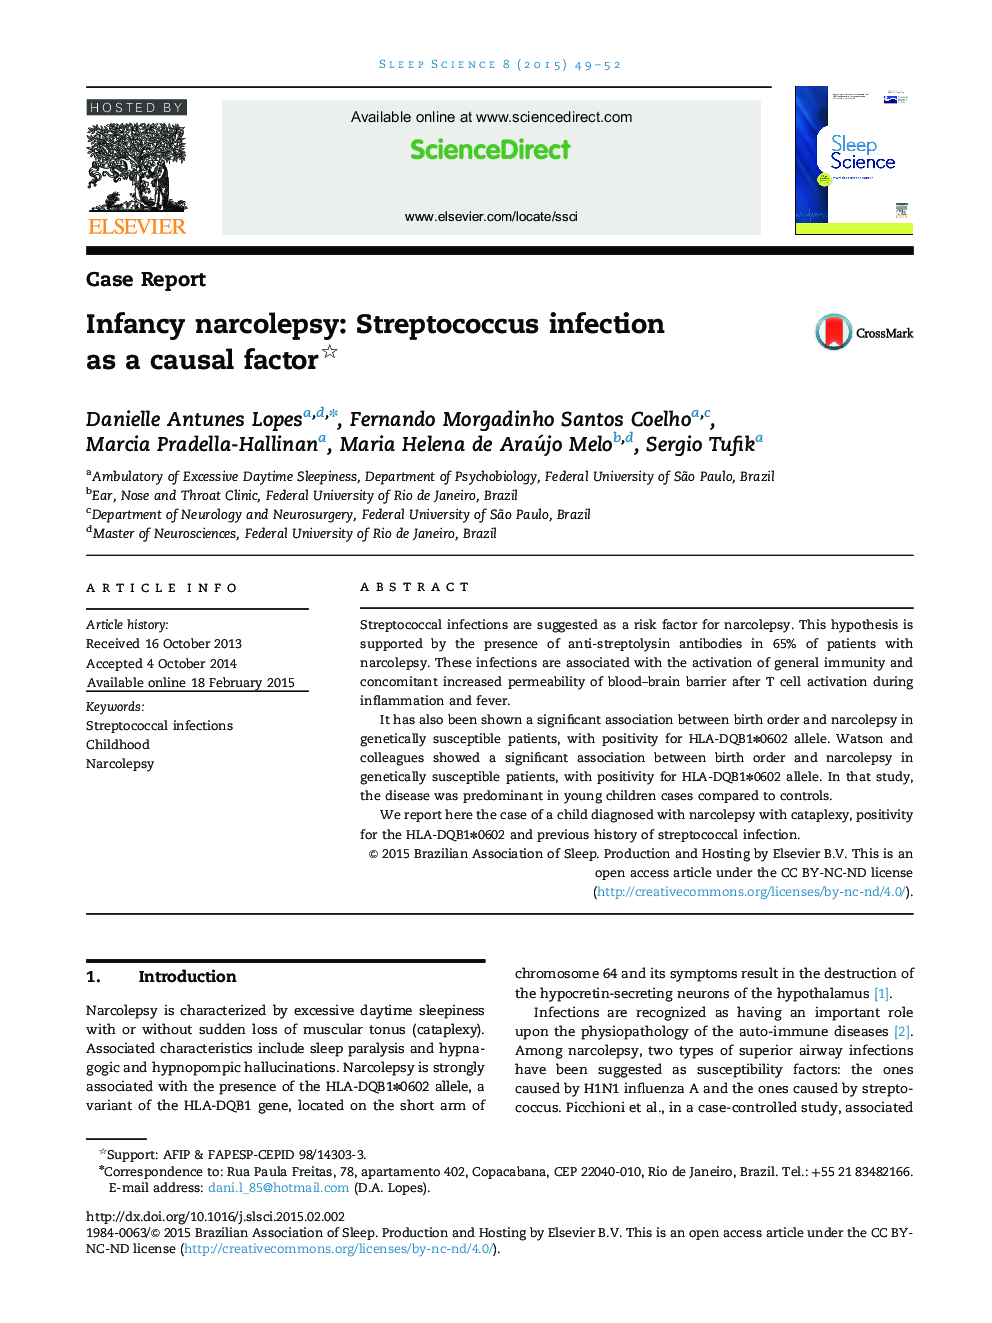 Infancy narcolepsy: Streptococcus infection as a causal factor 